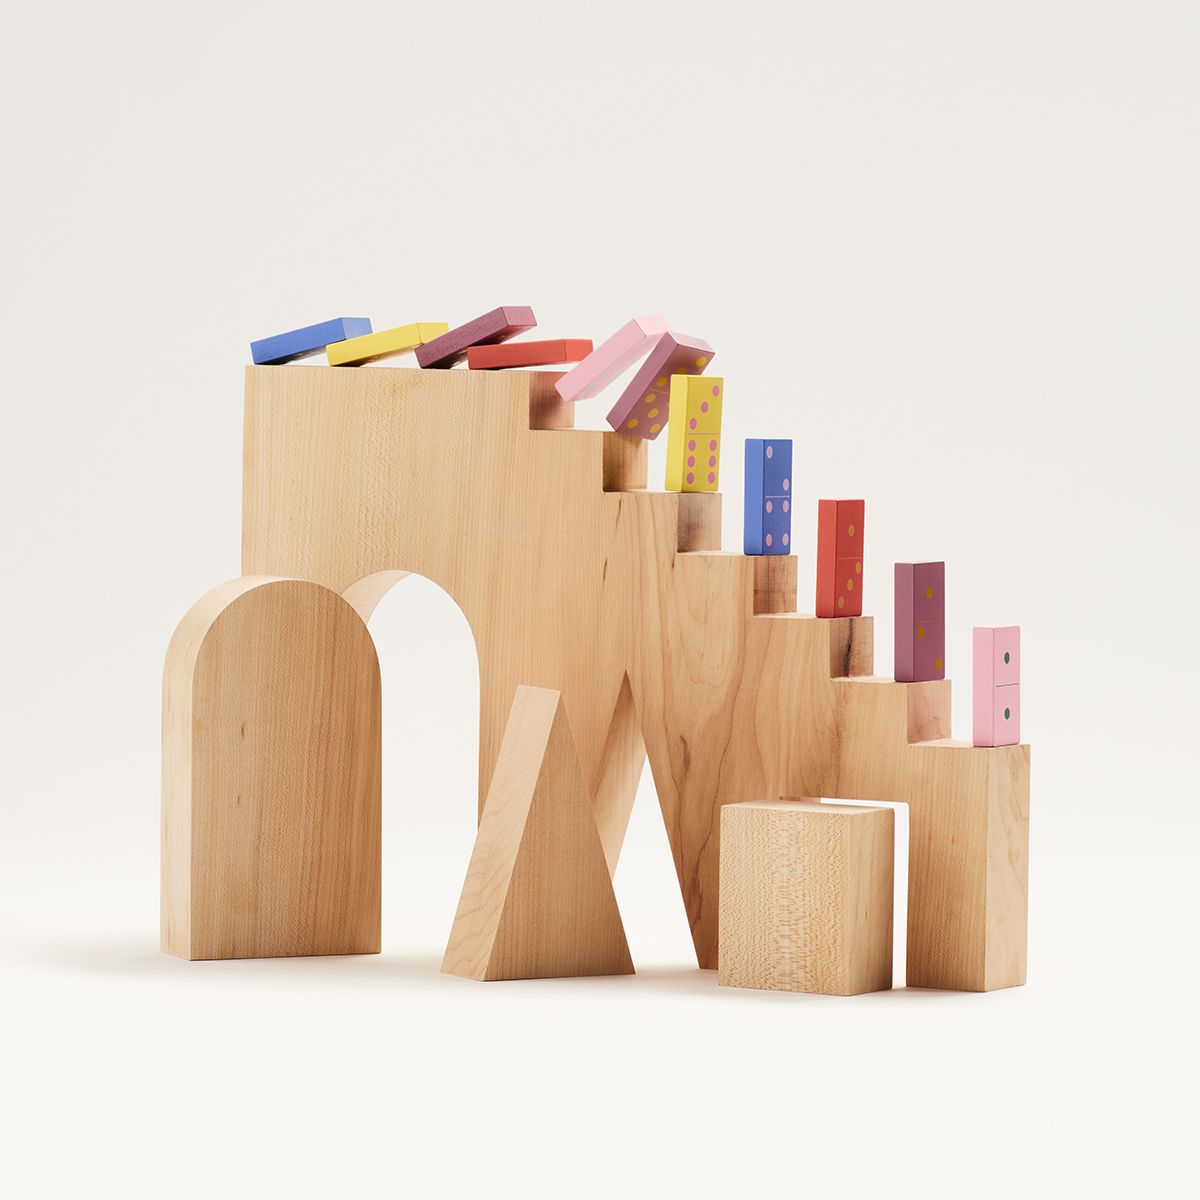 Still life of colorful dominoes falling down a wooden staircase made of blocks.